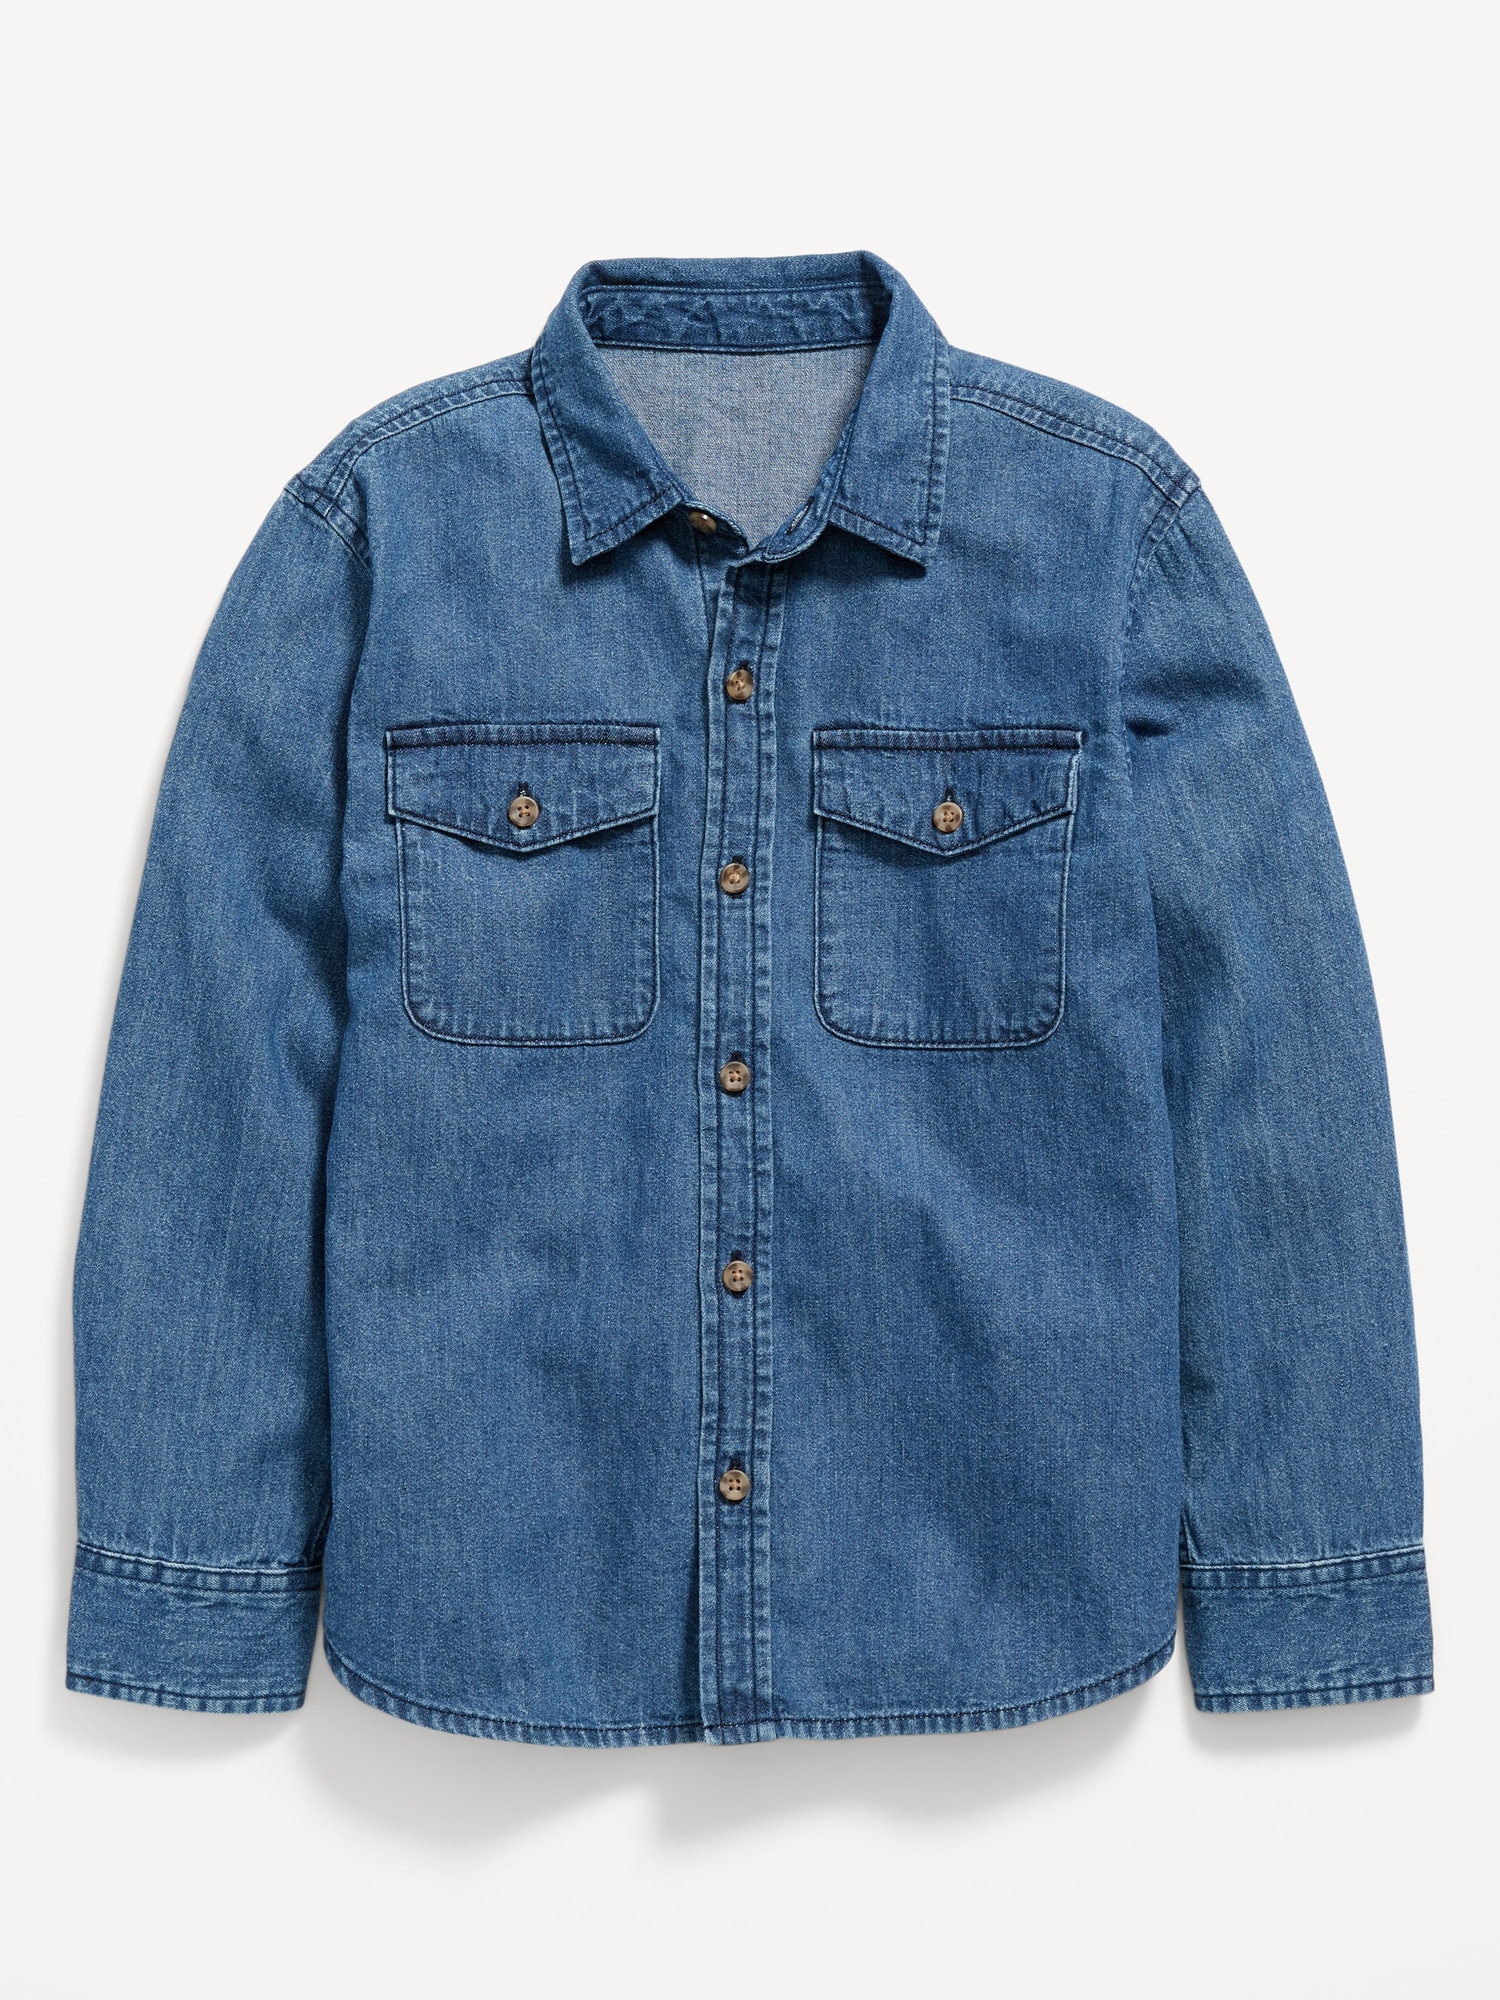 Long-Sleeve Button-Down Jean Utility Pocket Shirt for Boys | Old Navy